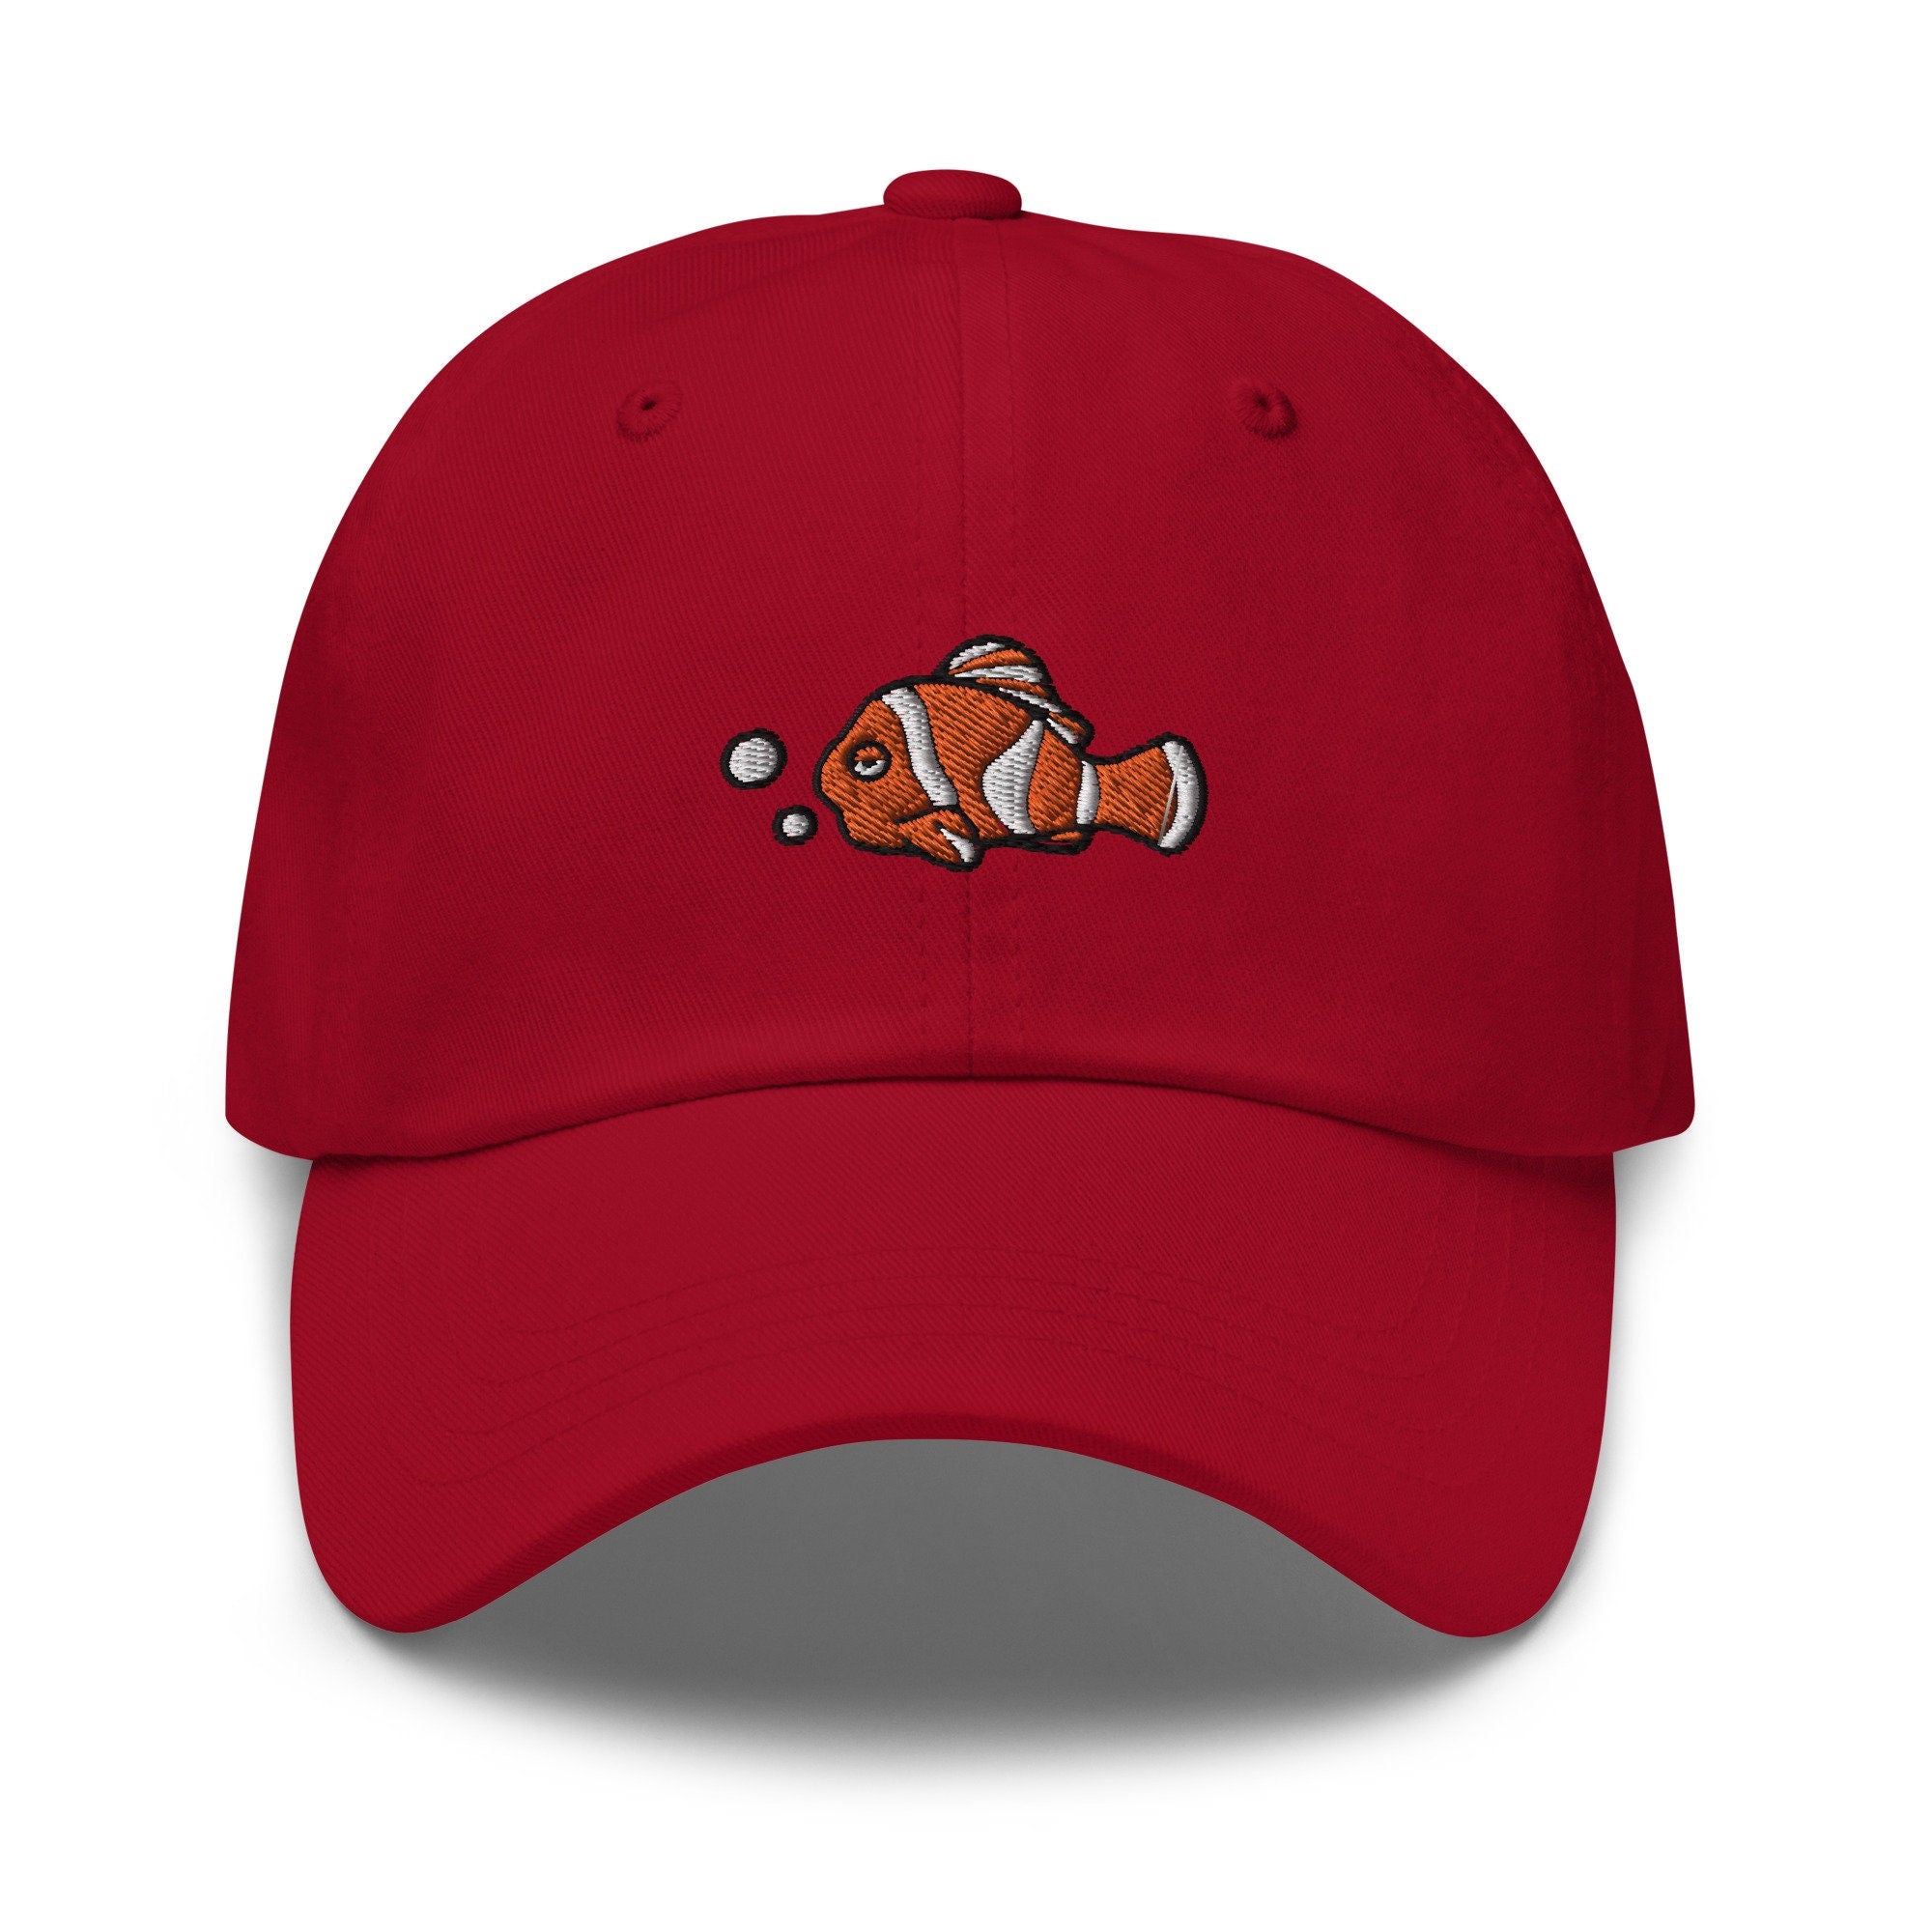 Clown Fish Embroidered Dad Hat